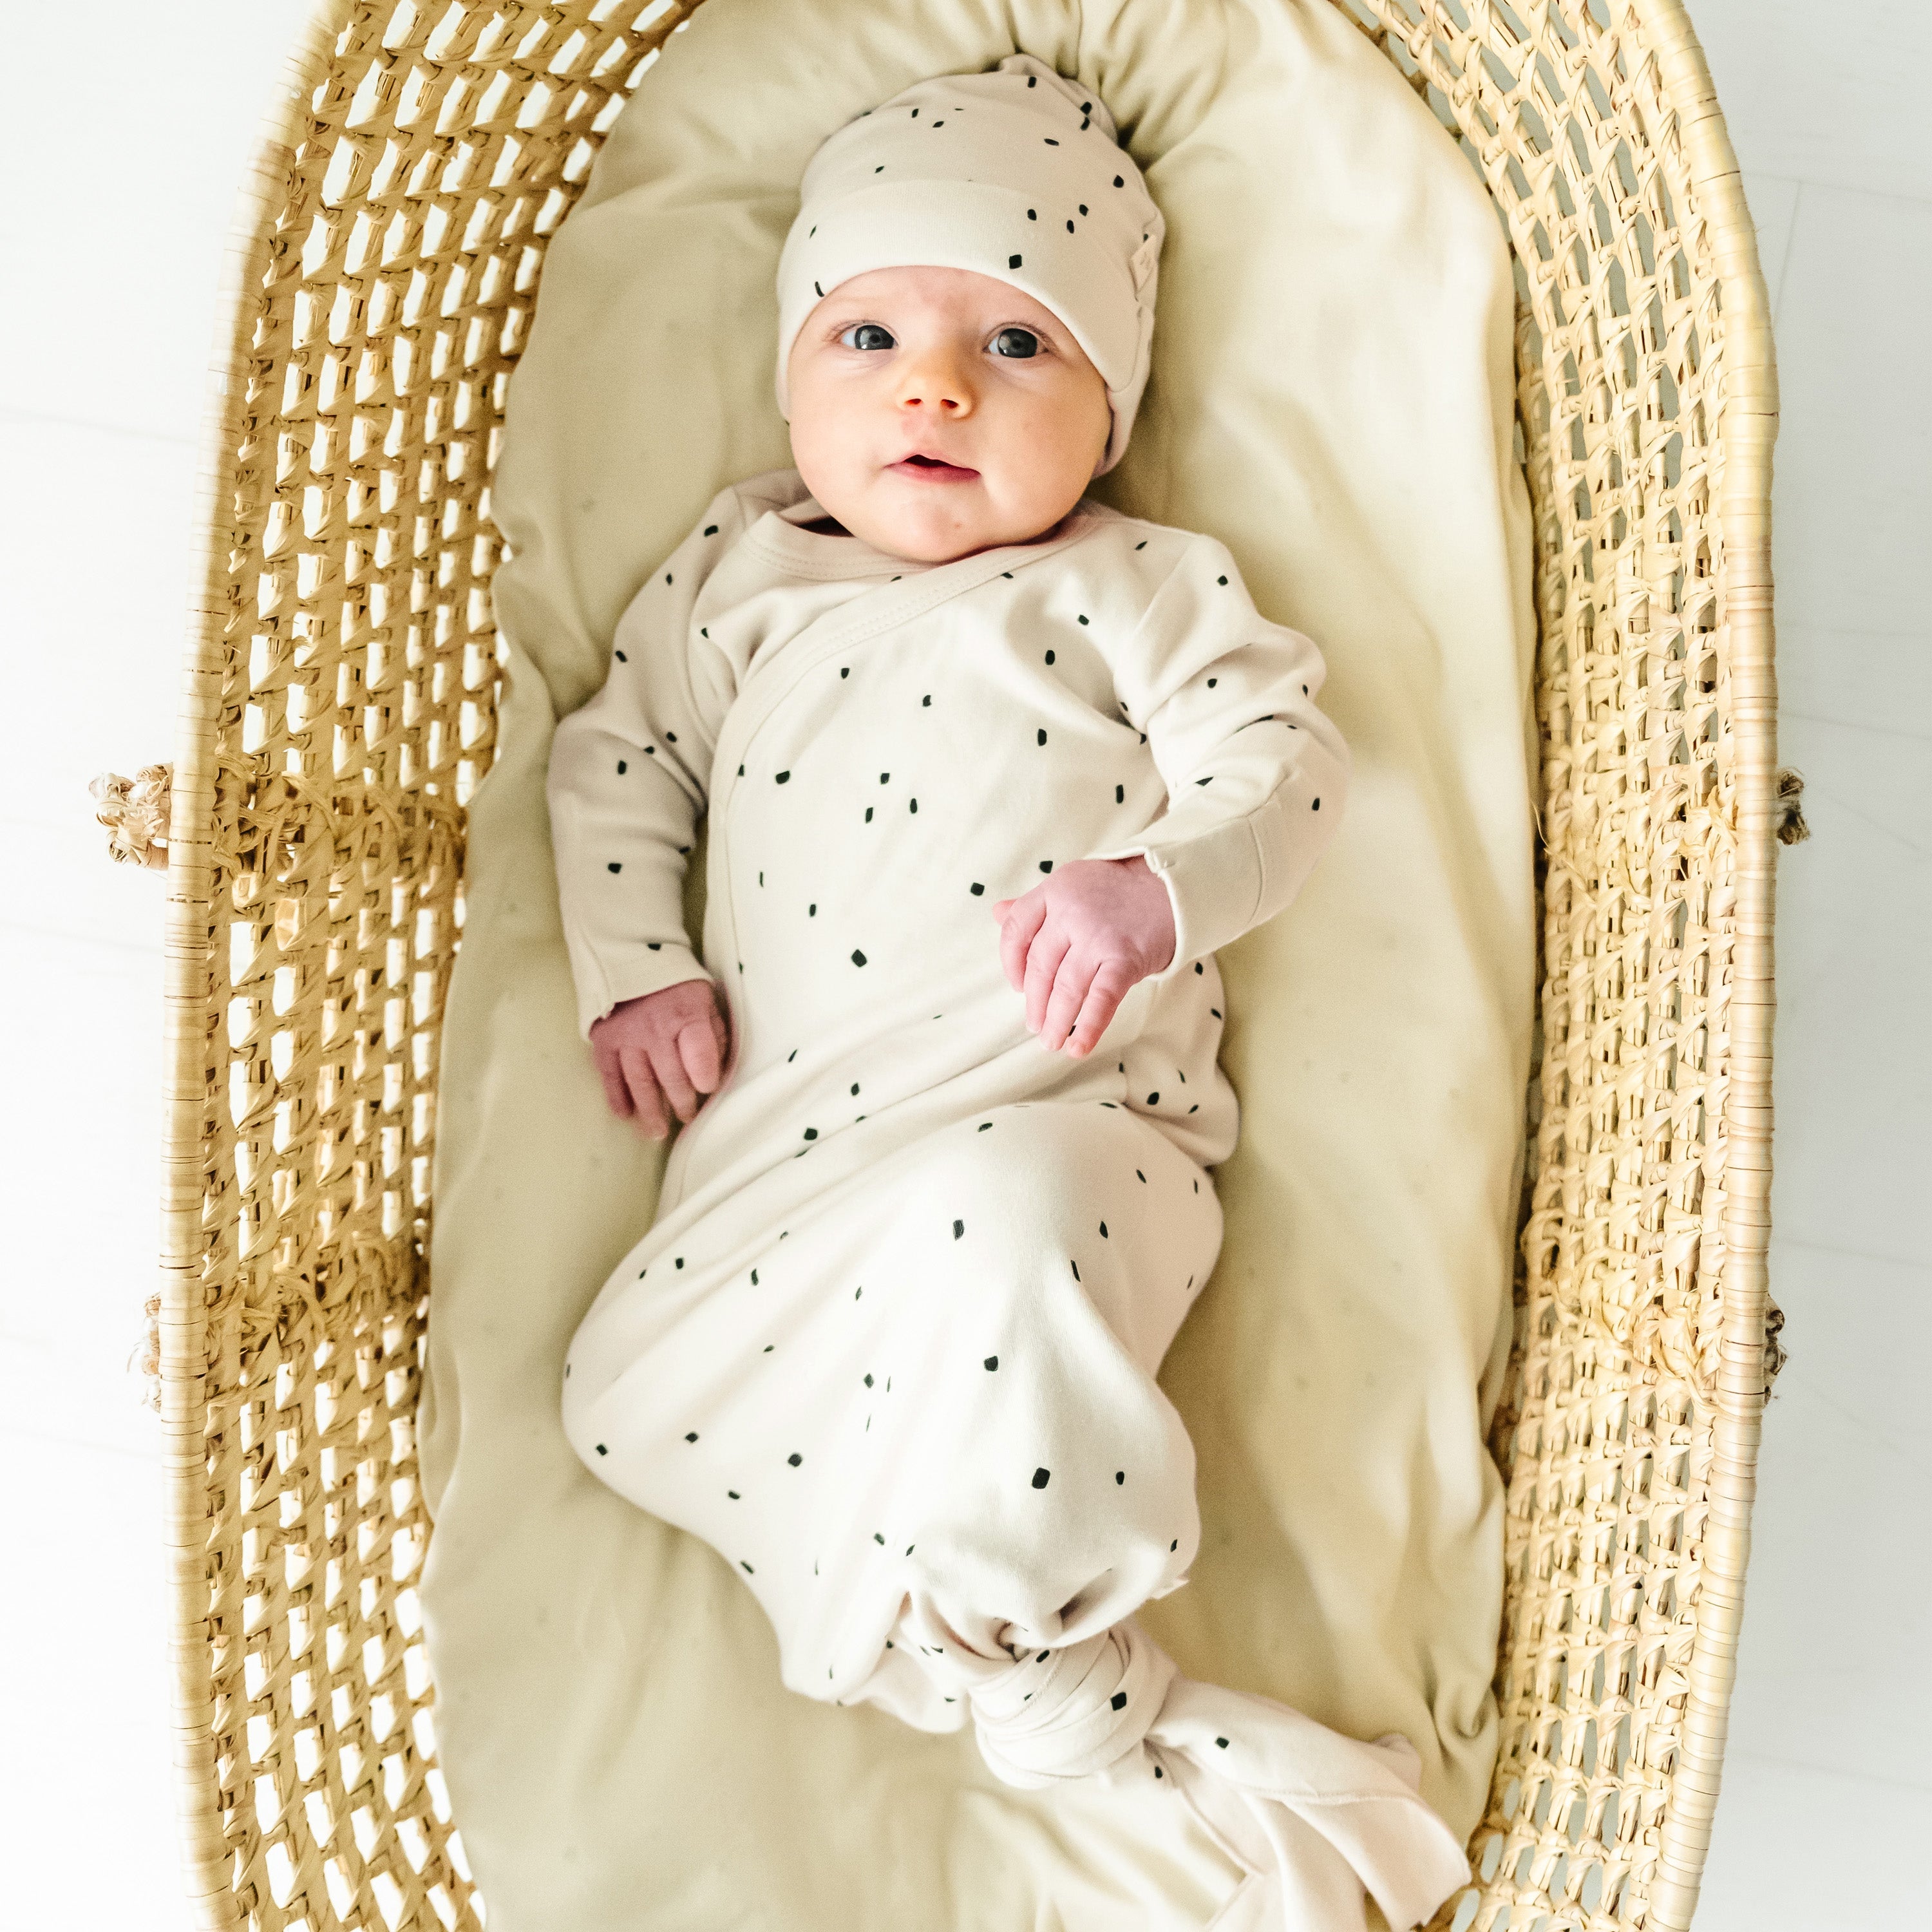 A toddler wearing a Makemake Organics Organic Kimono Knotted Sleep Gown in Pixie Dots and hat lies in a woven, oval-shaped bassinet, looking upward with a serene expression on a white background.